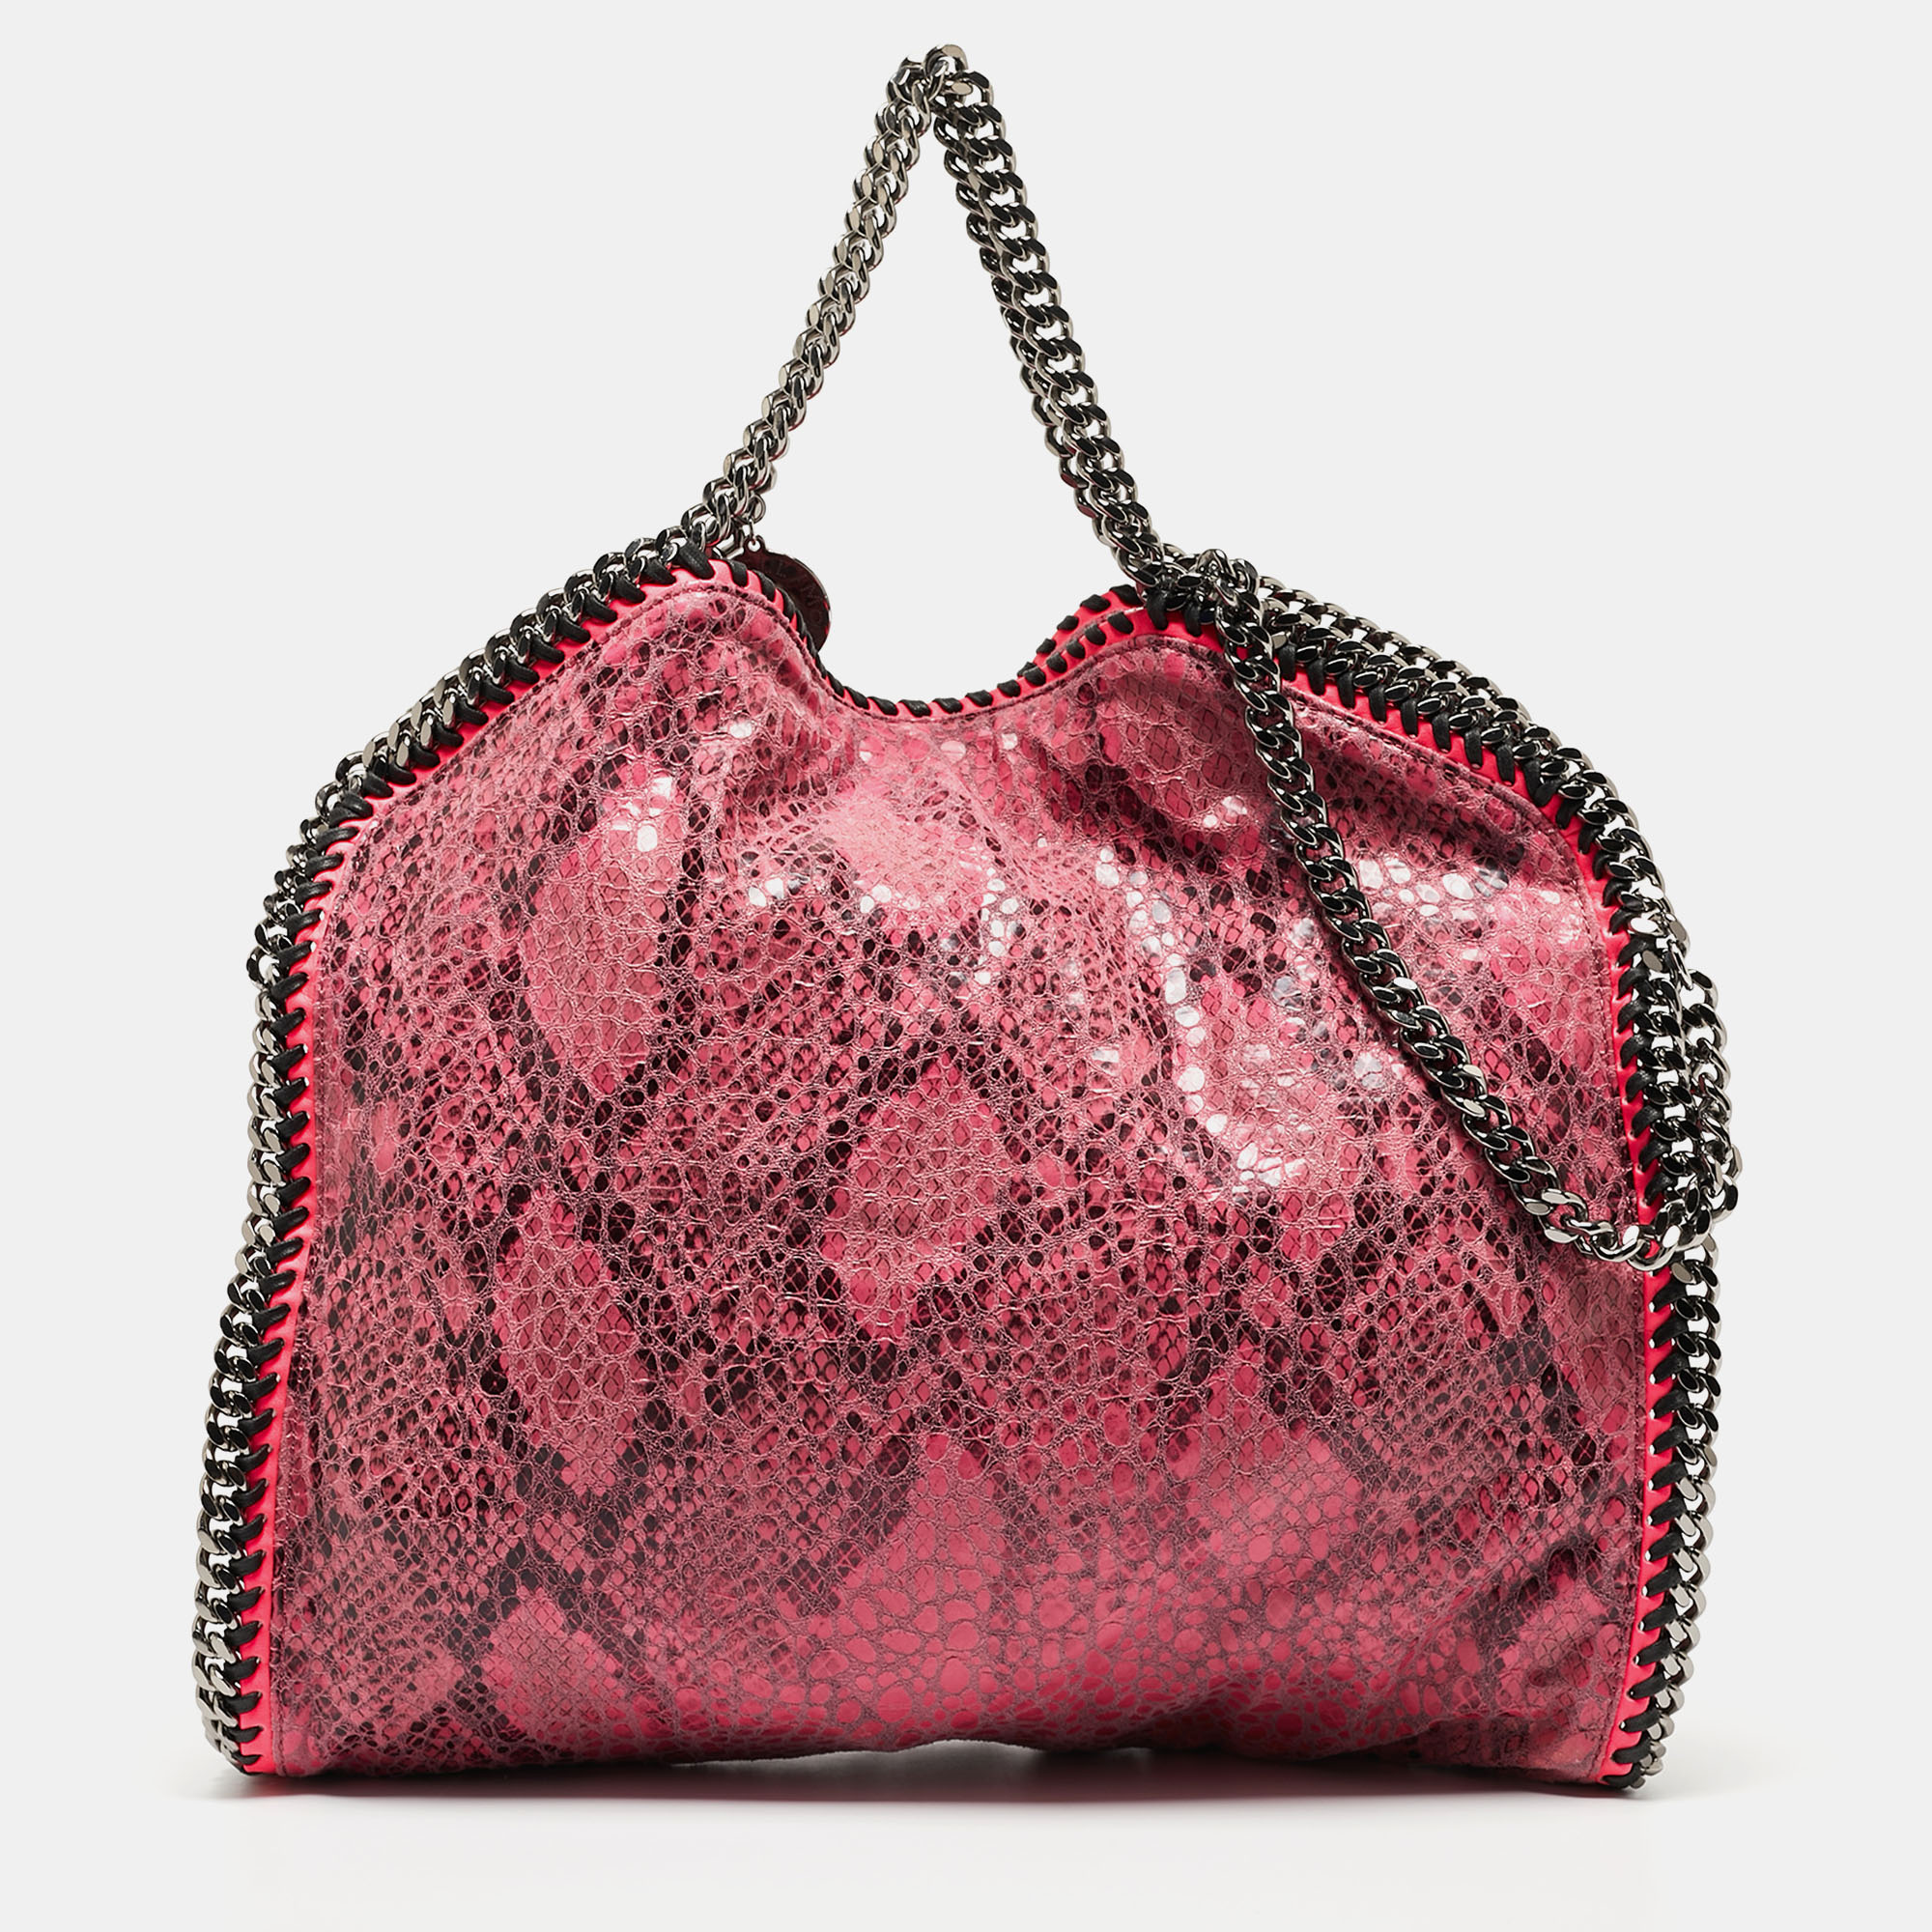 This Falabella bag from Stella Mc Cartney is a beauty. Crafted from faux python leather it is durable and stylish. While the chain detailing elevates its beauty the lined interior will dutifully hold all your daily essentials.